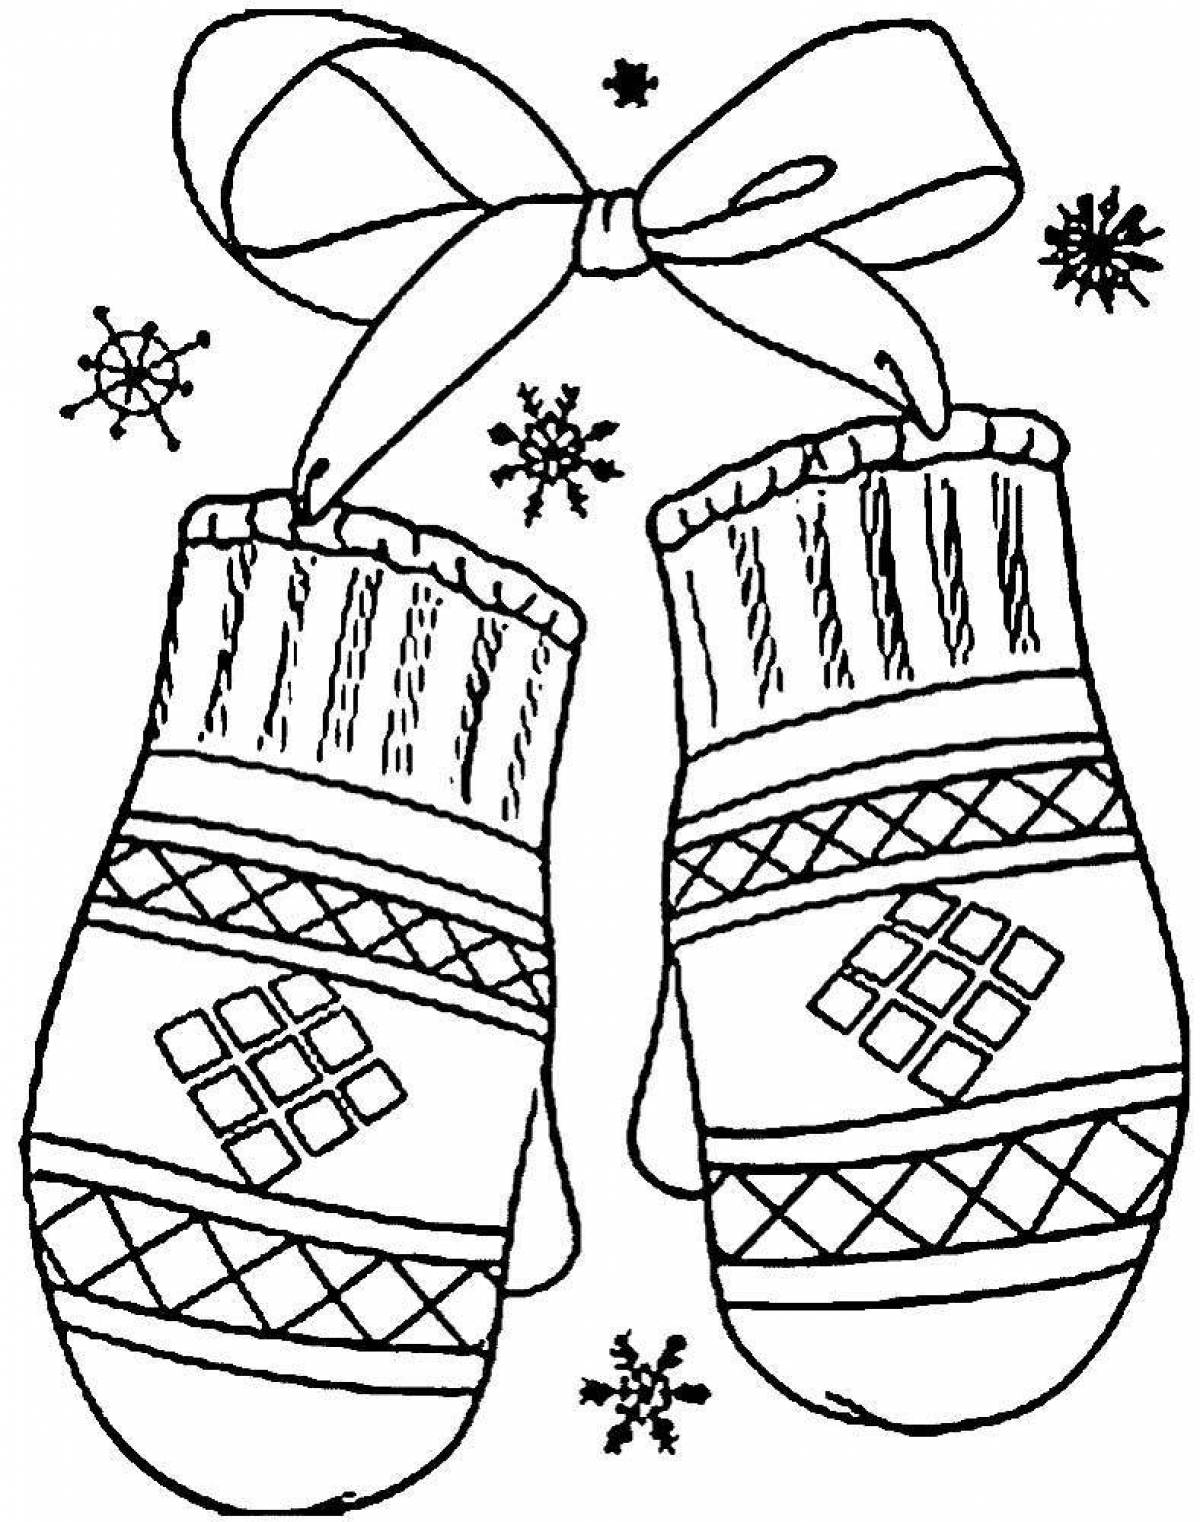 Coloring page adorable mittens for children 4-5 years old